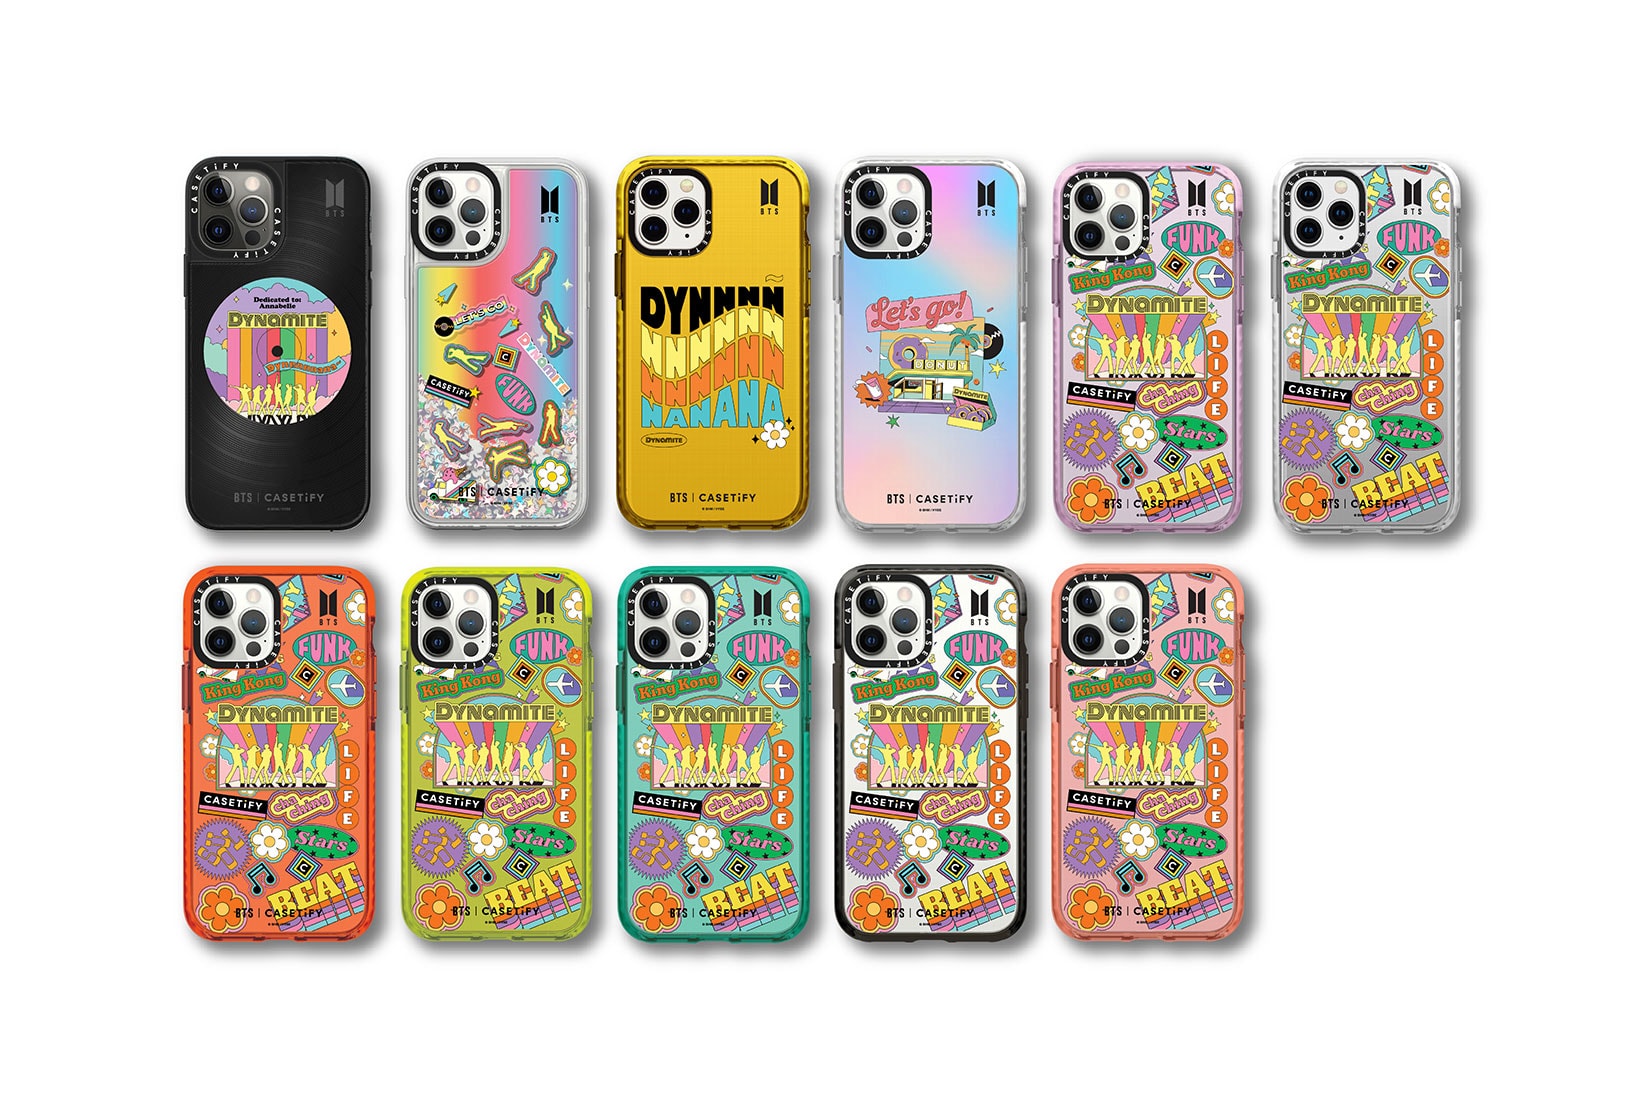 bts casetify collaboration tech accessories collection apple iphone cases dynamite